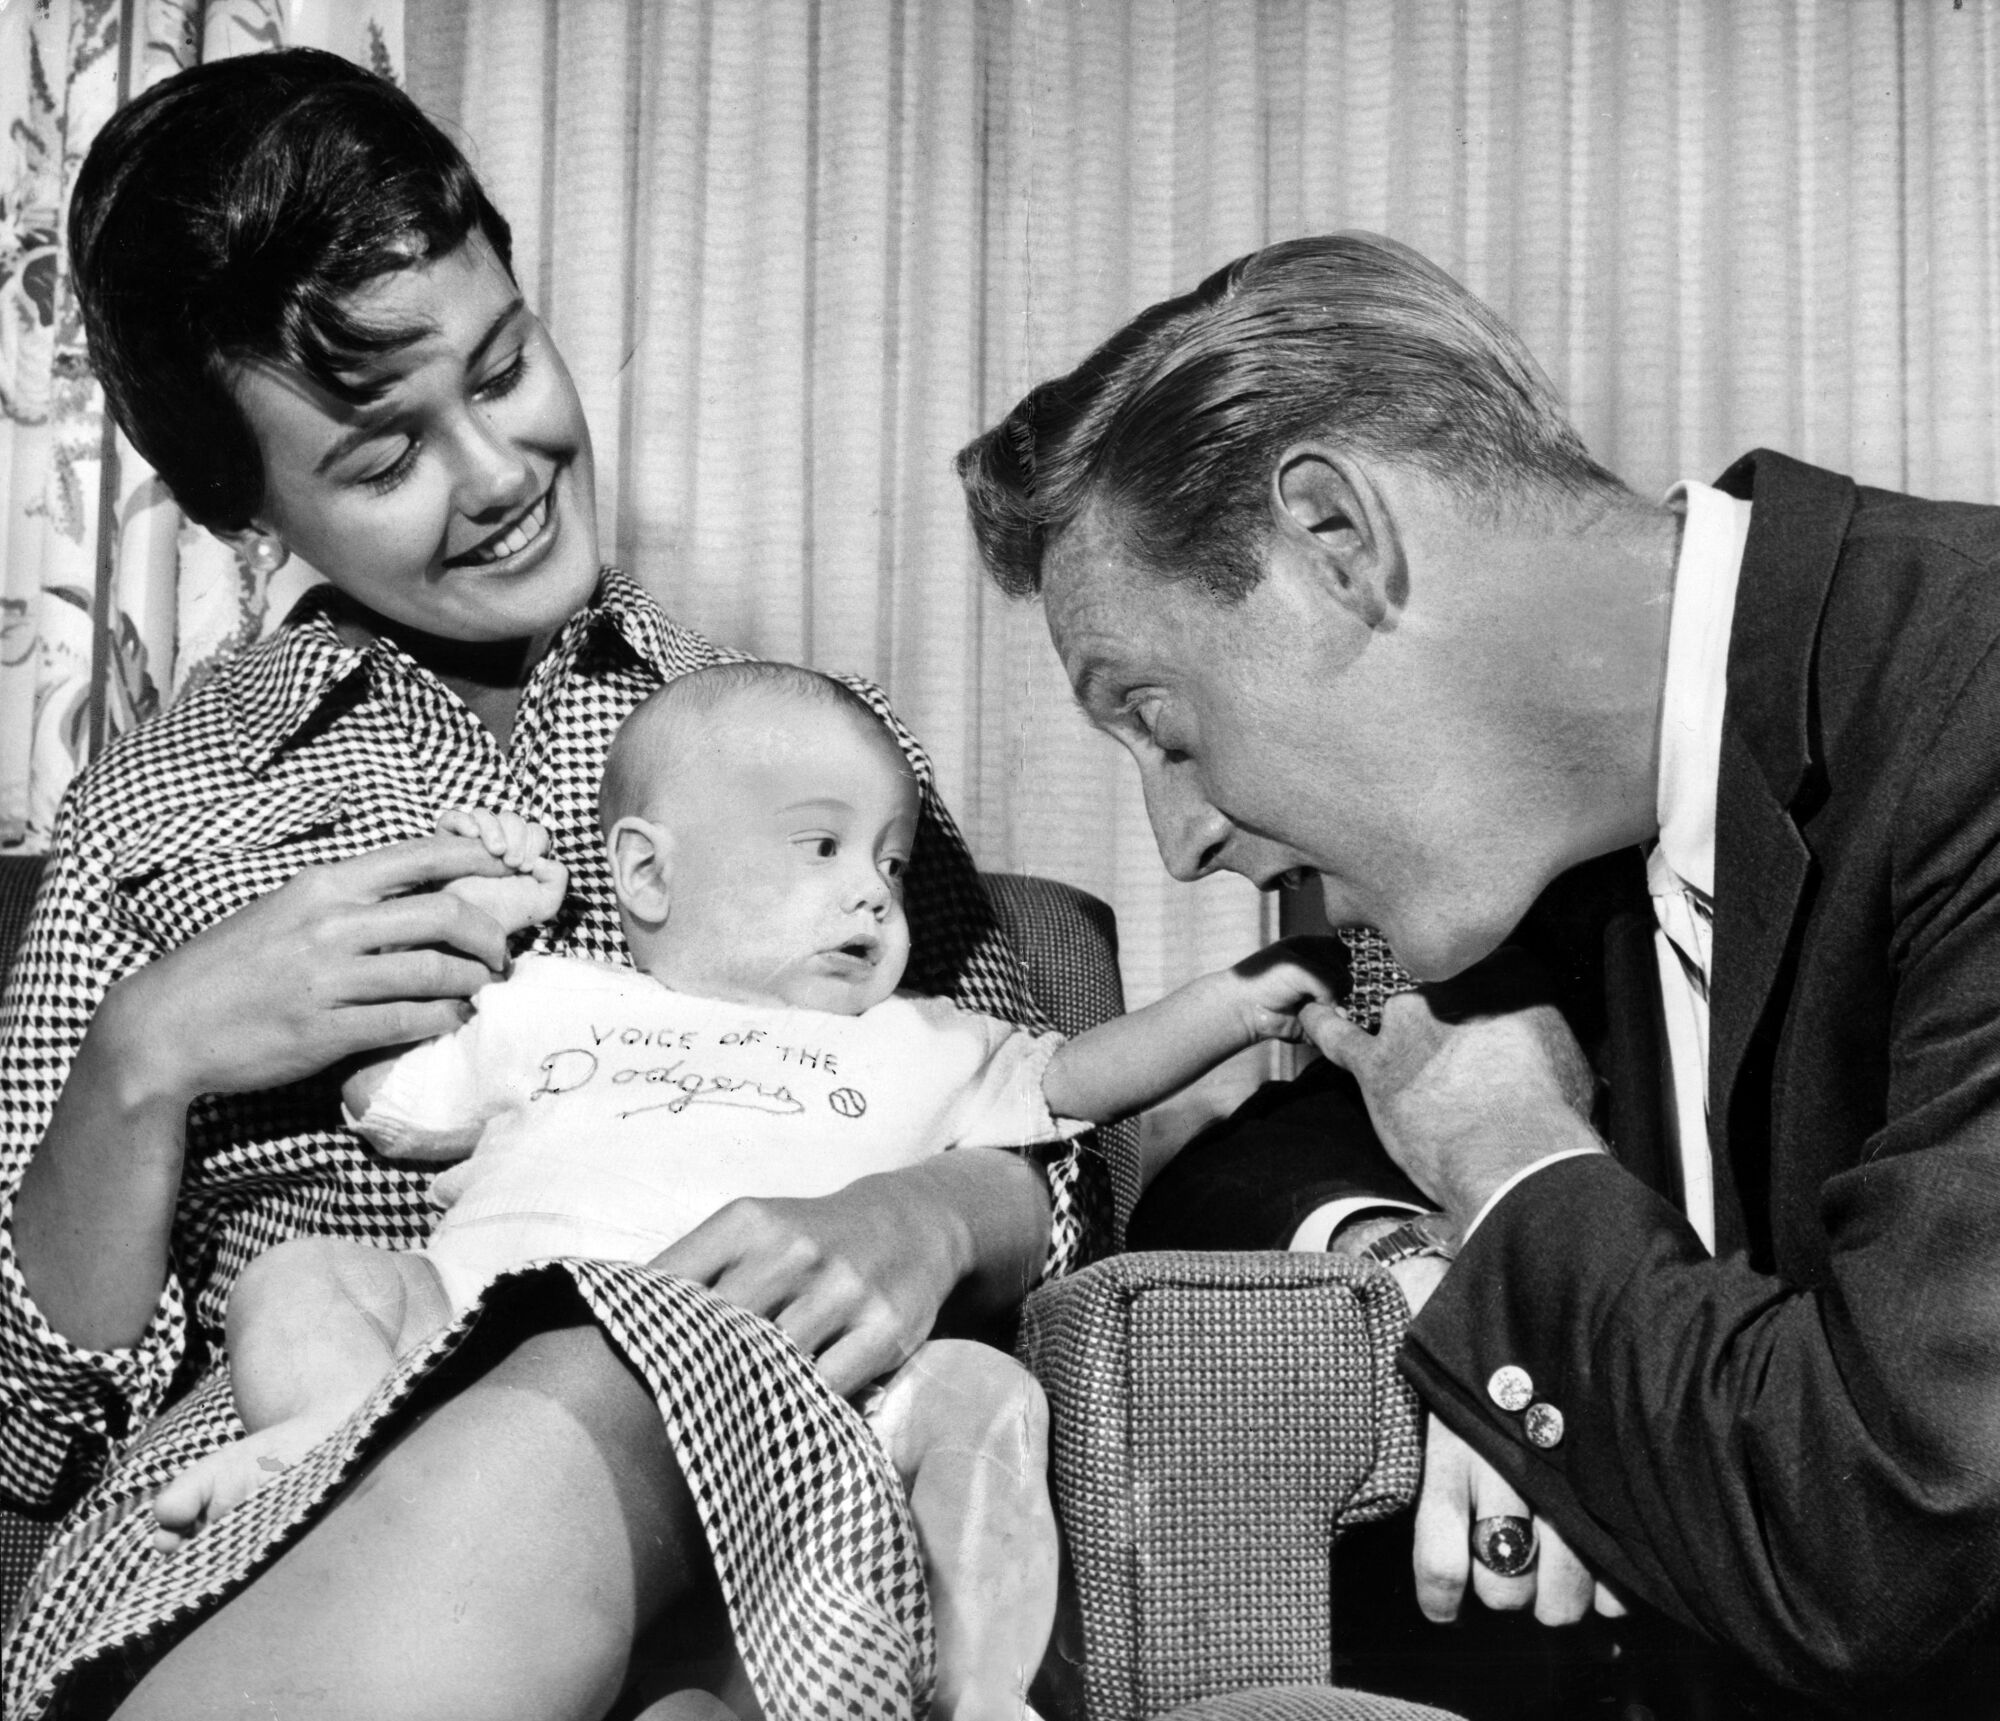 Vin Scully and wife Joan admire their 2-month old son Michael on April 29, 1960.